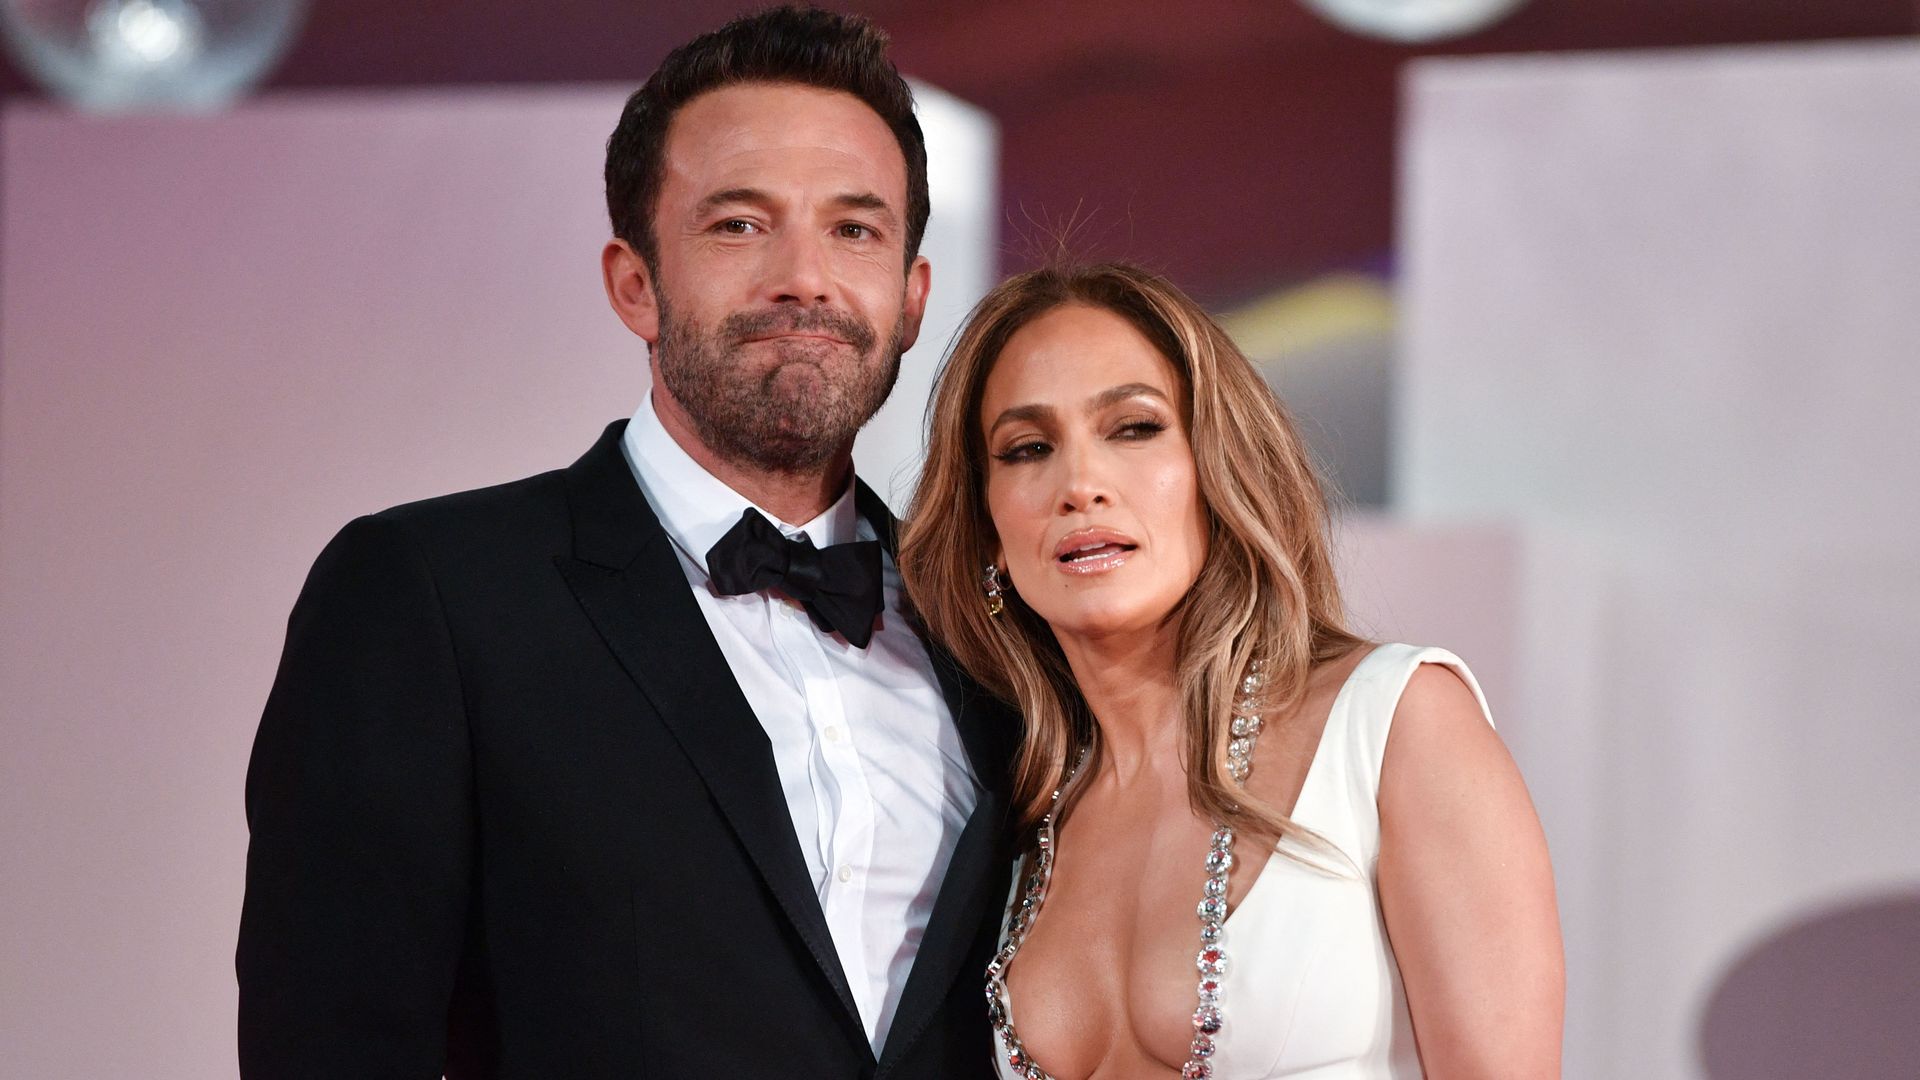 US actor Ben Affleck and US actress and singer Jennifer Lopez arrive for the screening of the film "The Last Duel" presented out of competition on September 10, 2021 during the 78th Venice Film Festival at Venice Lido. 